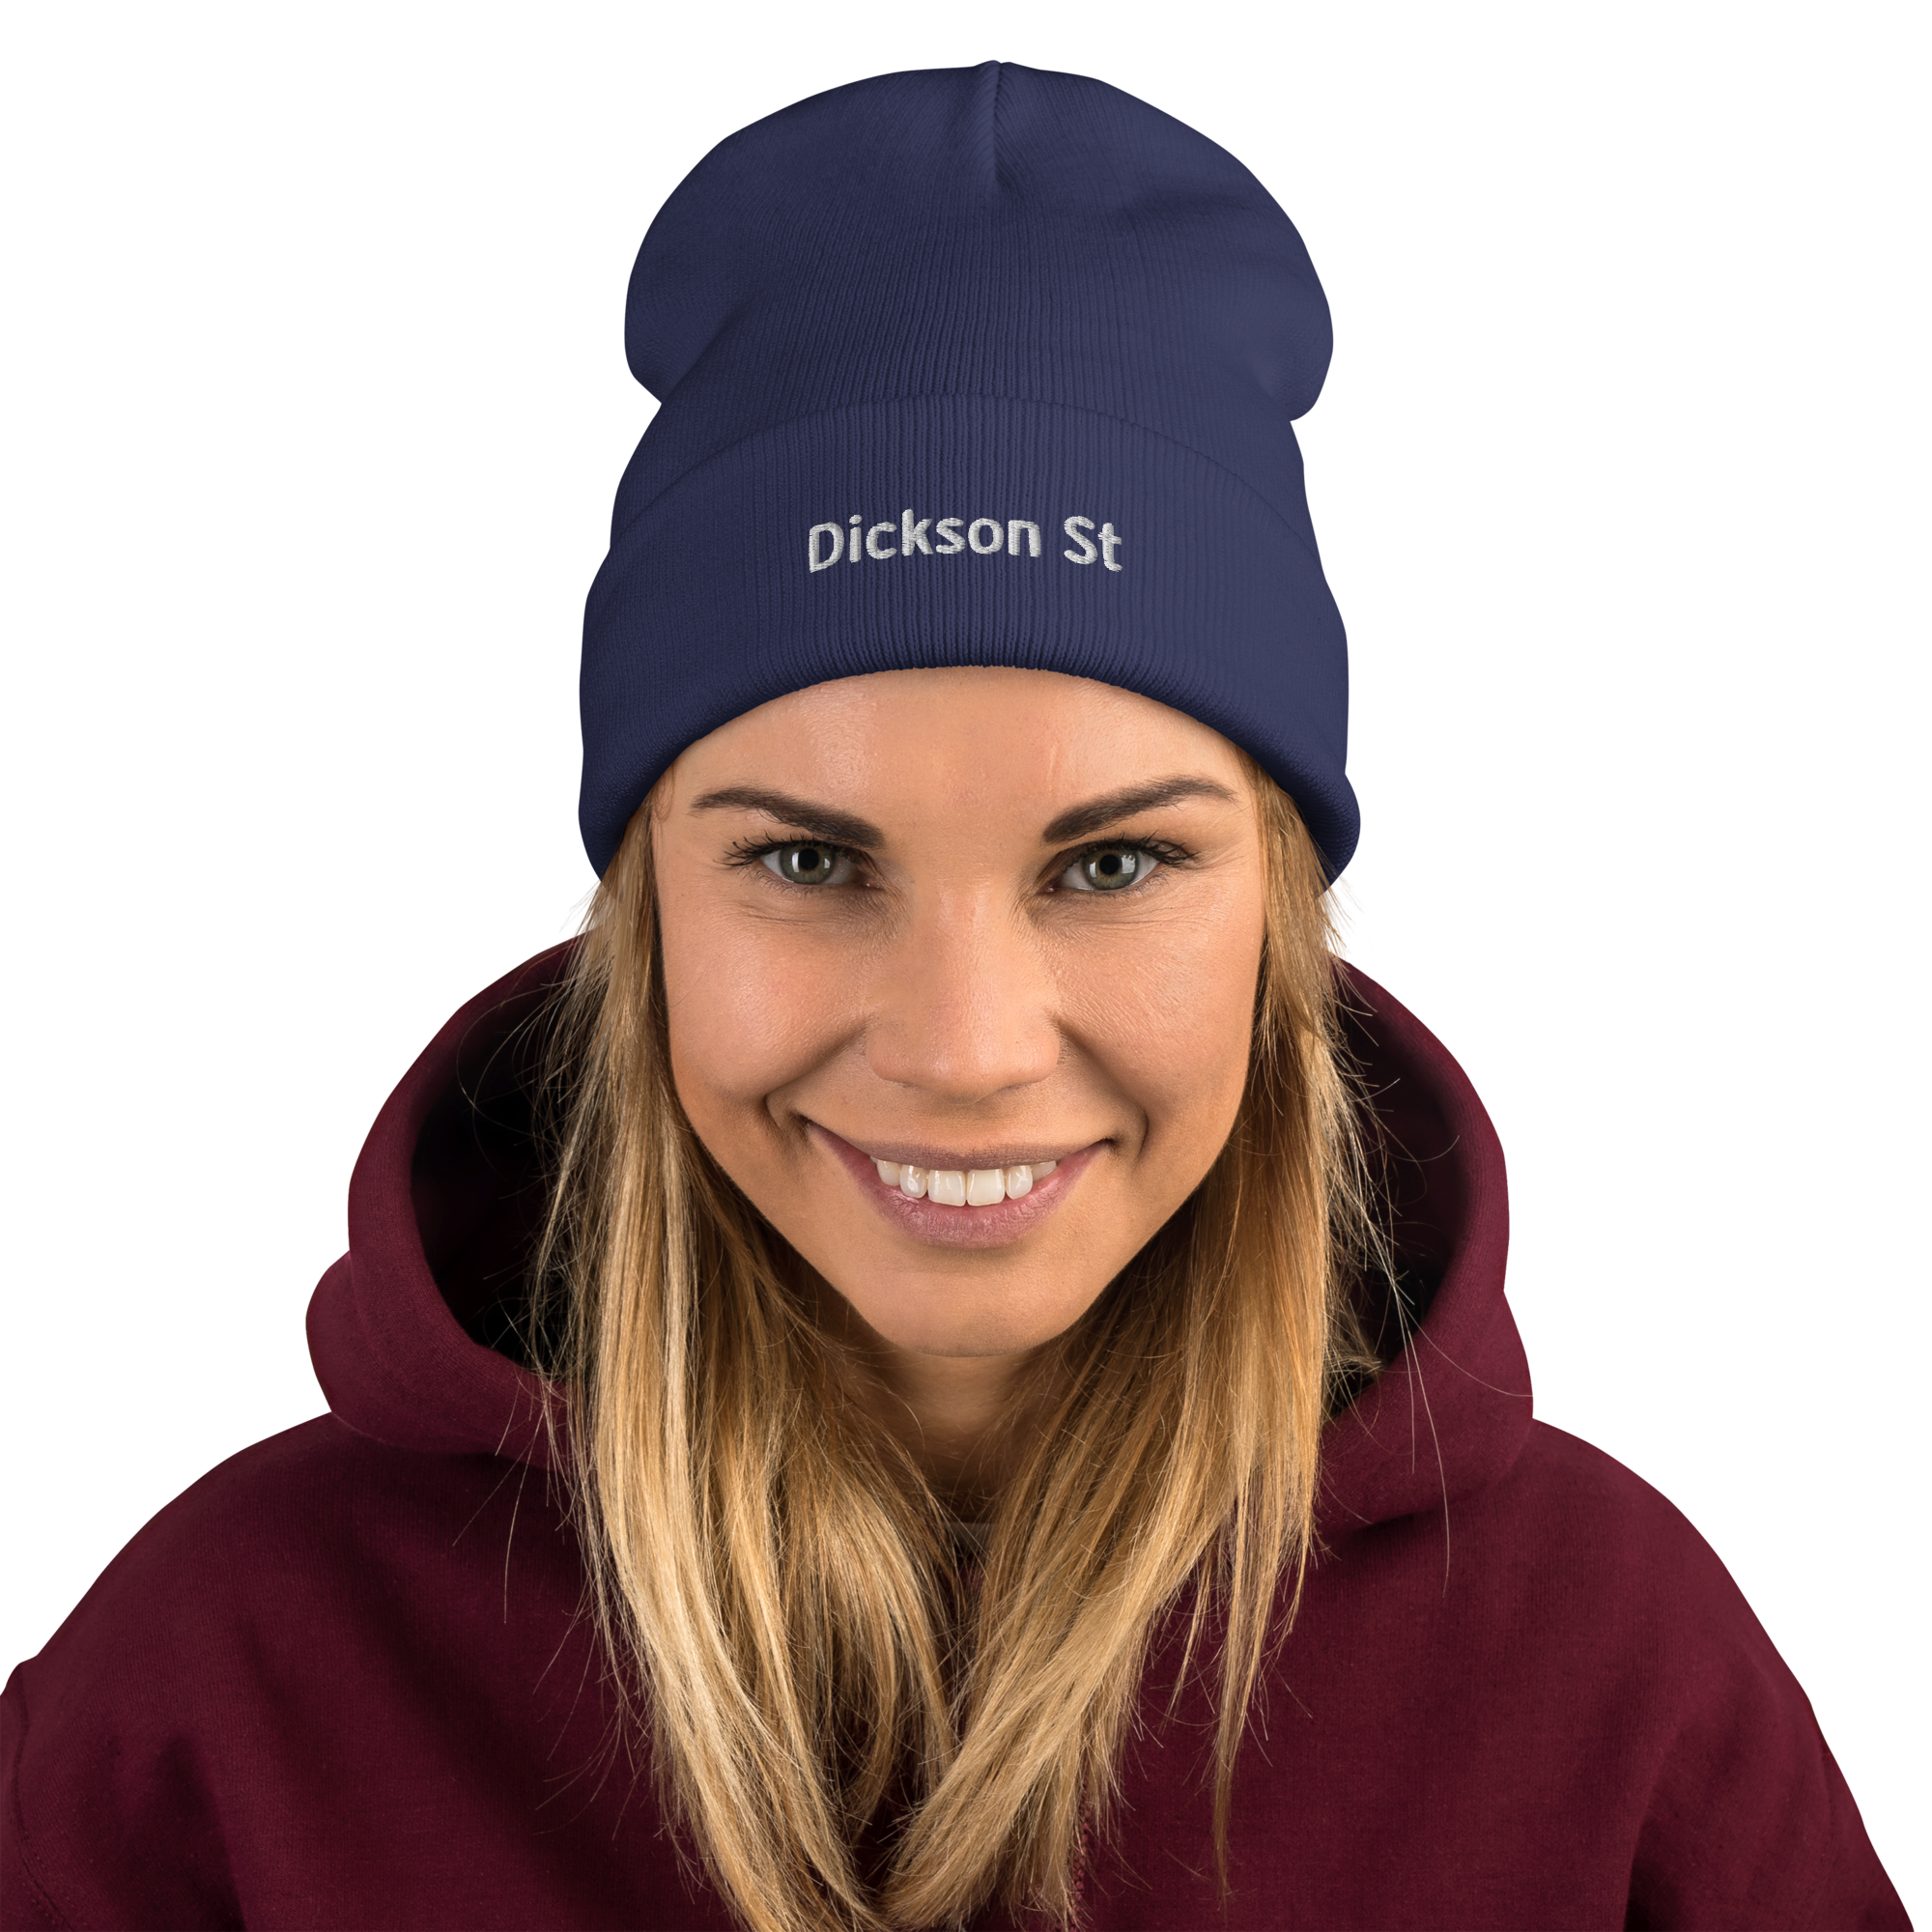 Dickson St Embroidered Beanie